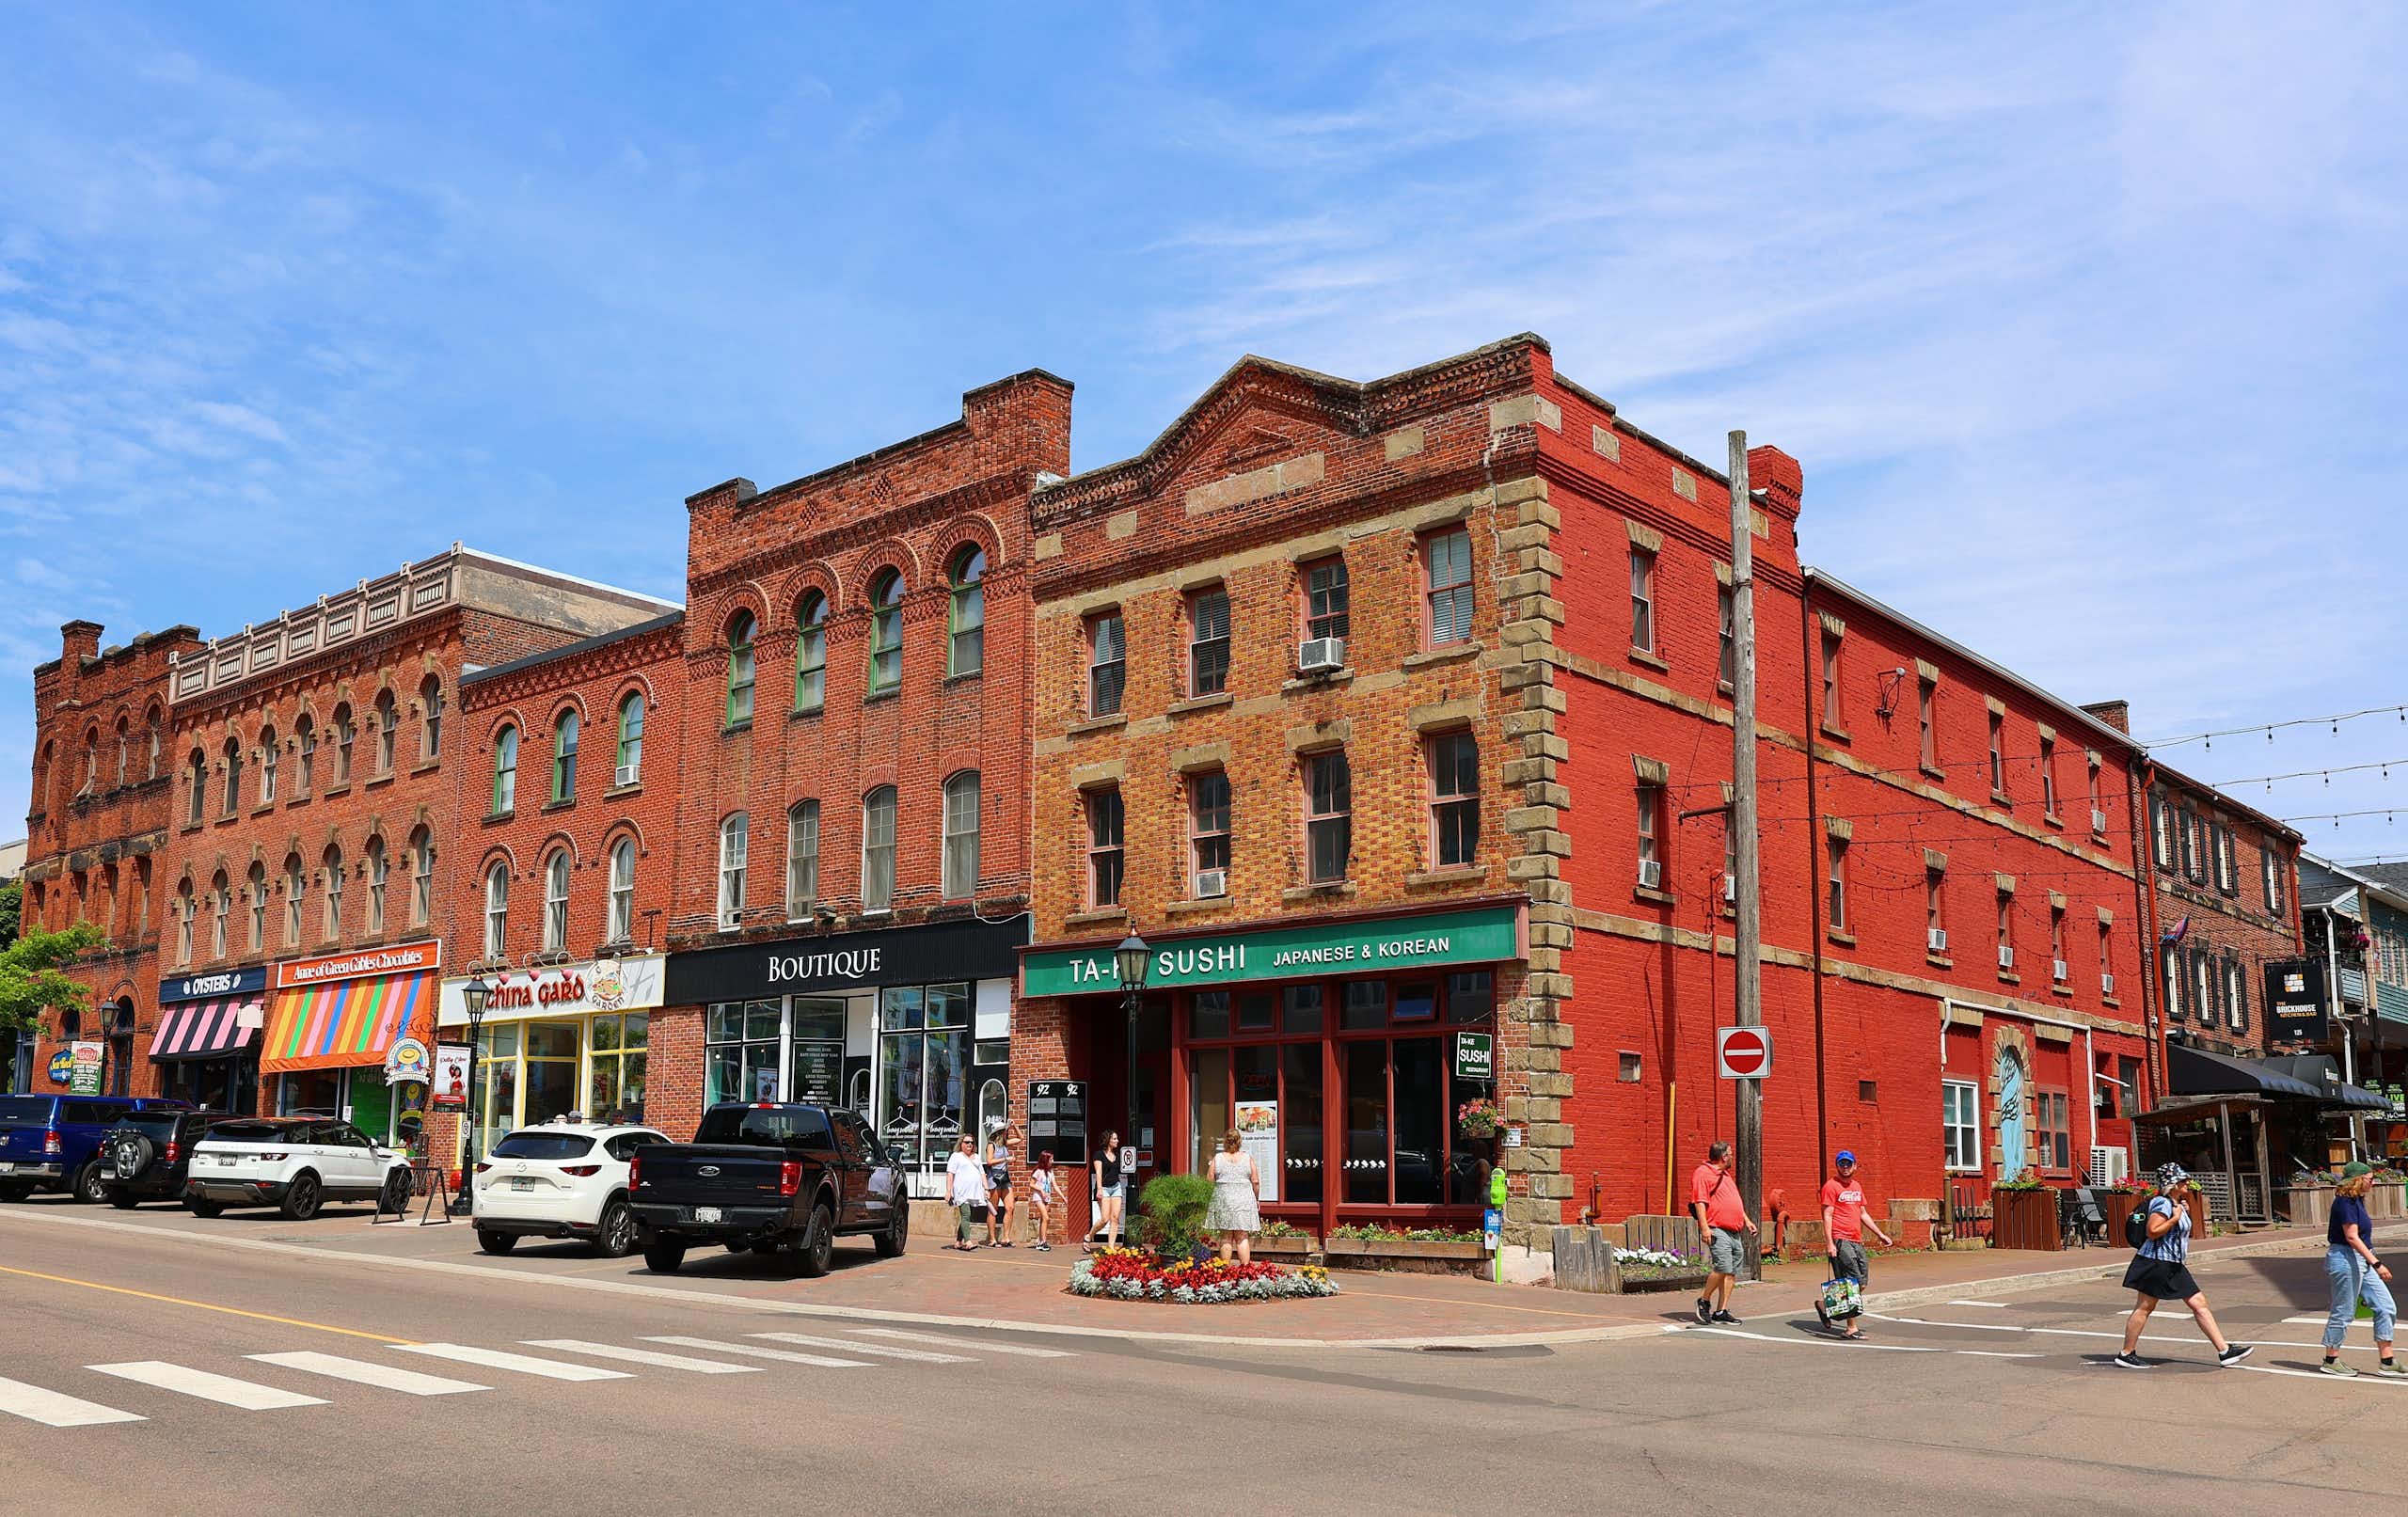 a row of red-brick buildings with retail on the ground floor